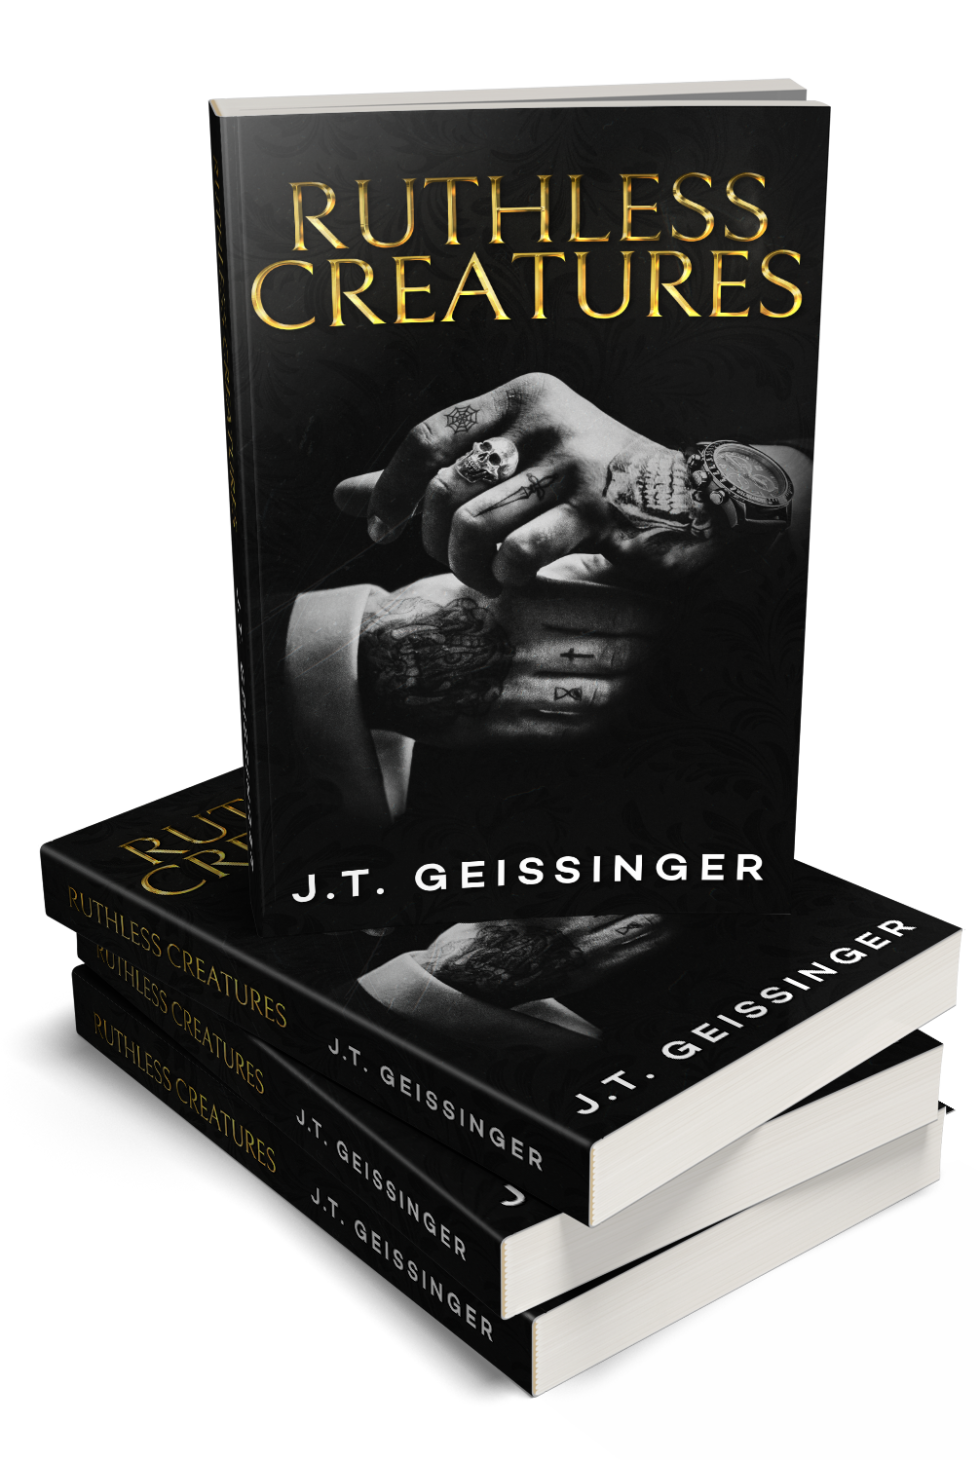 jt geissinger ruthless creatures